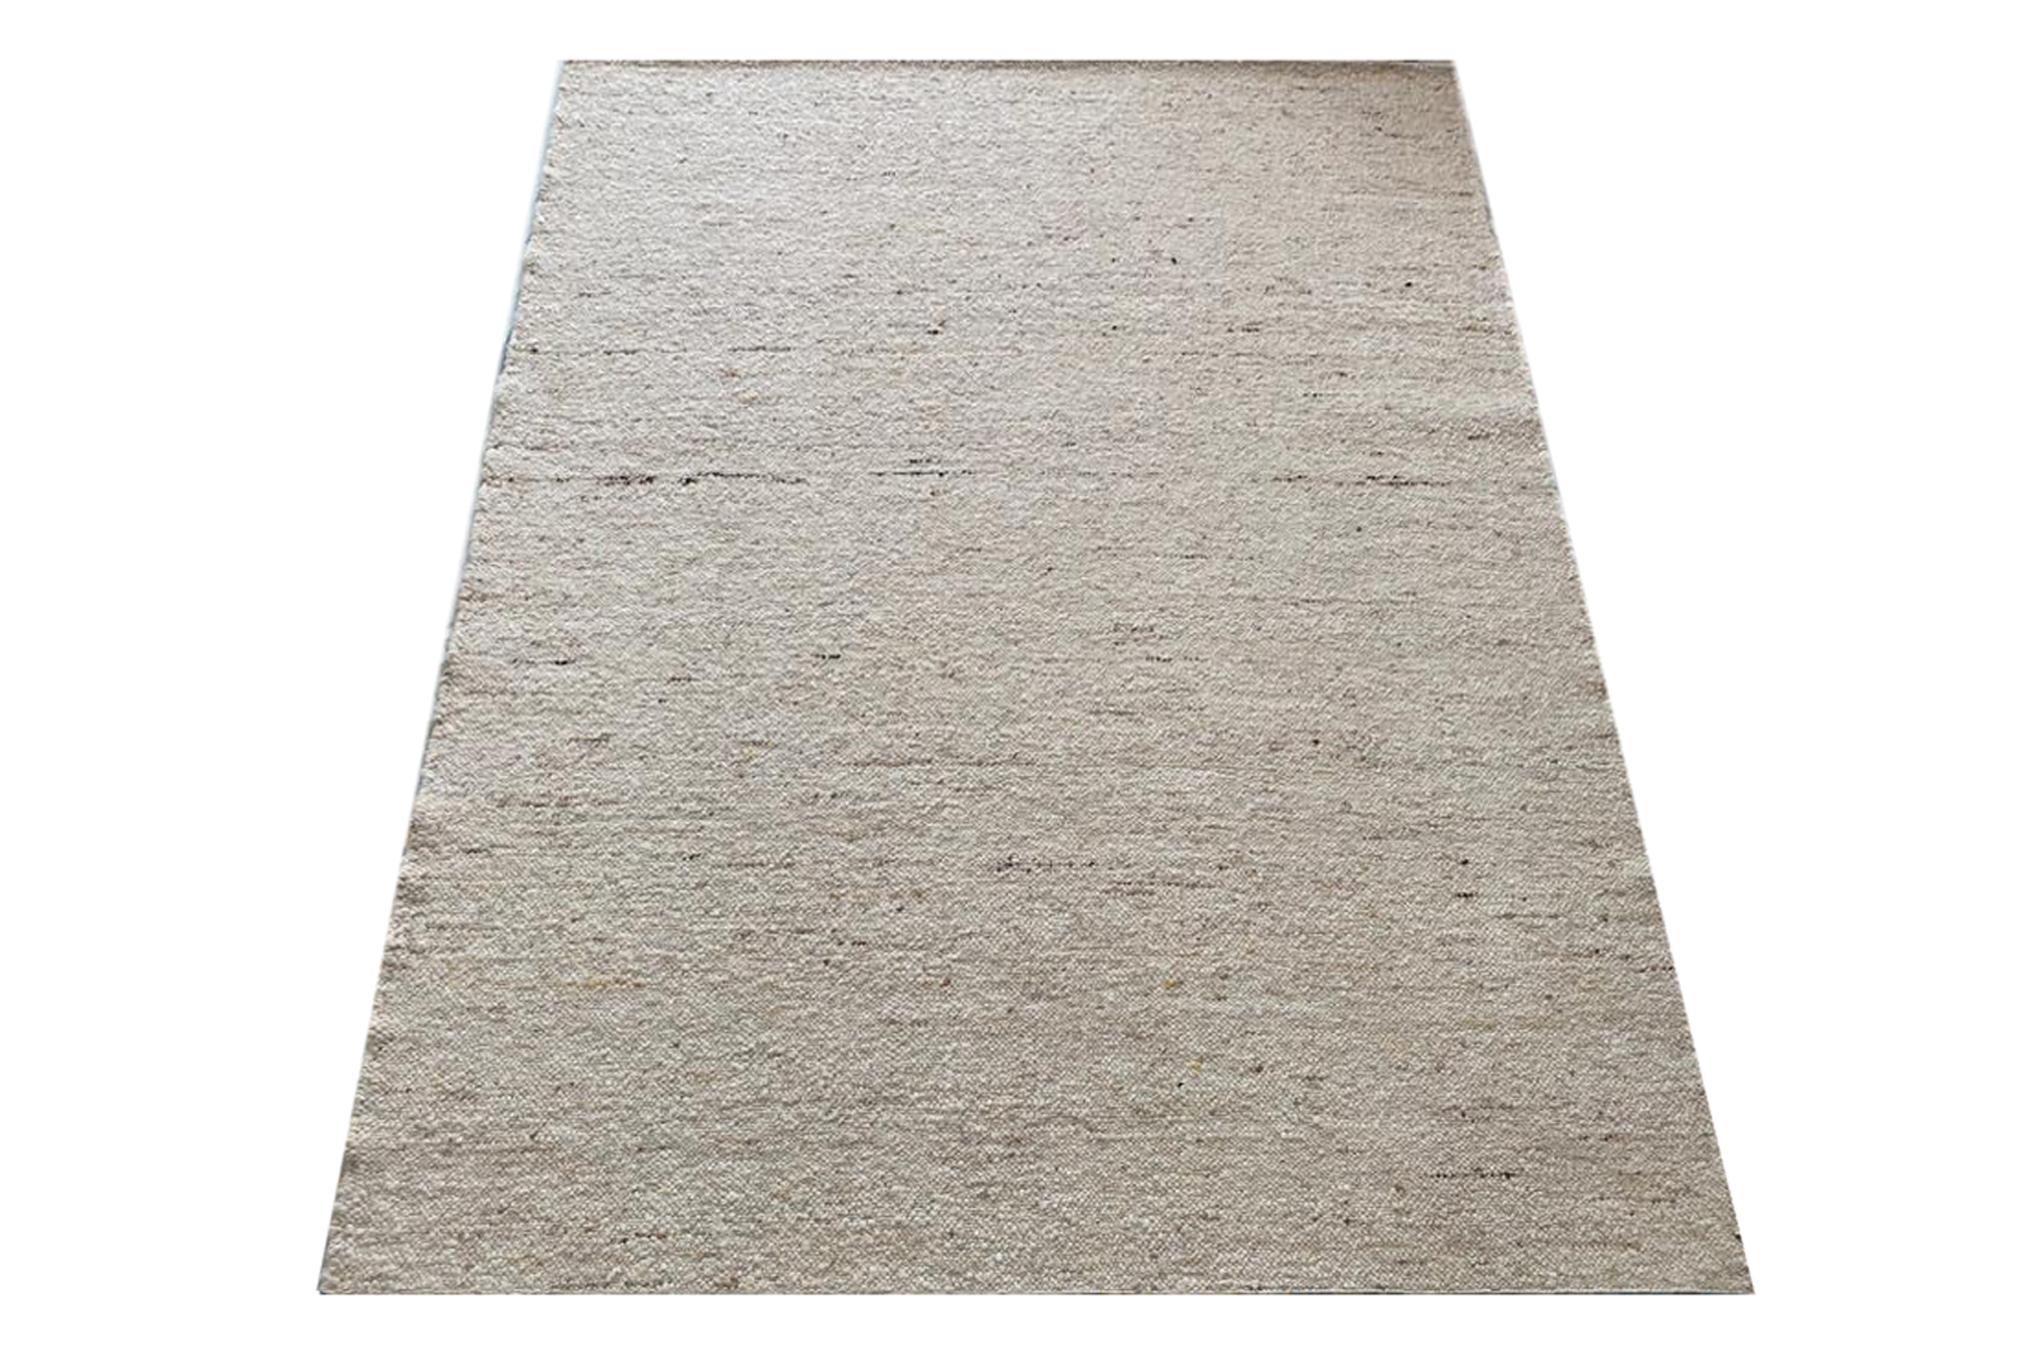 Hand-woven raw wool.

8' x 10'

New

Origin: India

Field Colors: White

Accent Colors: Ivory, Light-Brown, Brown